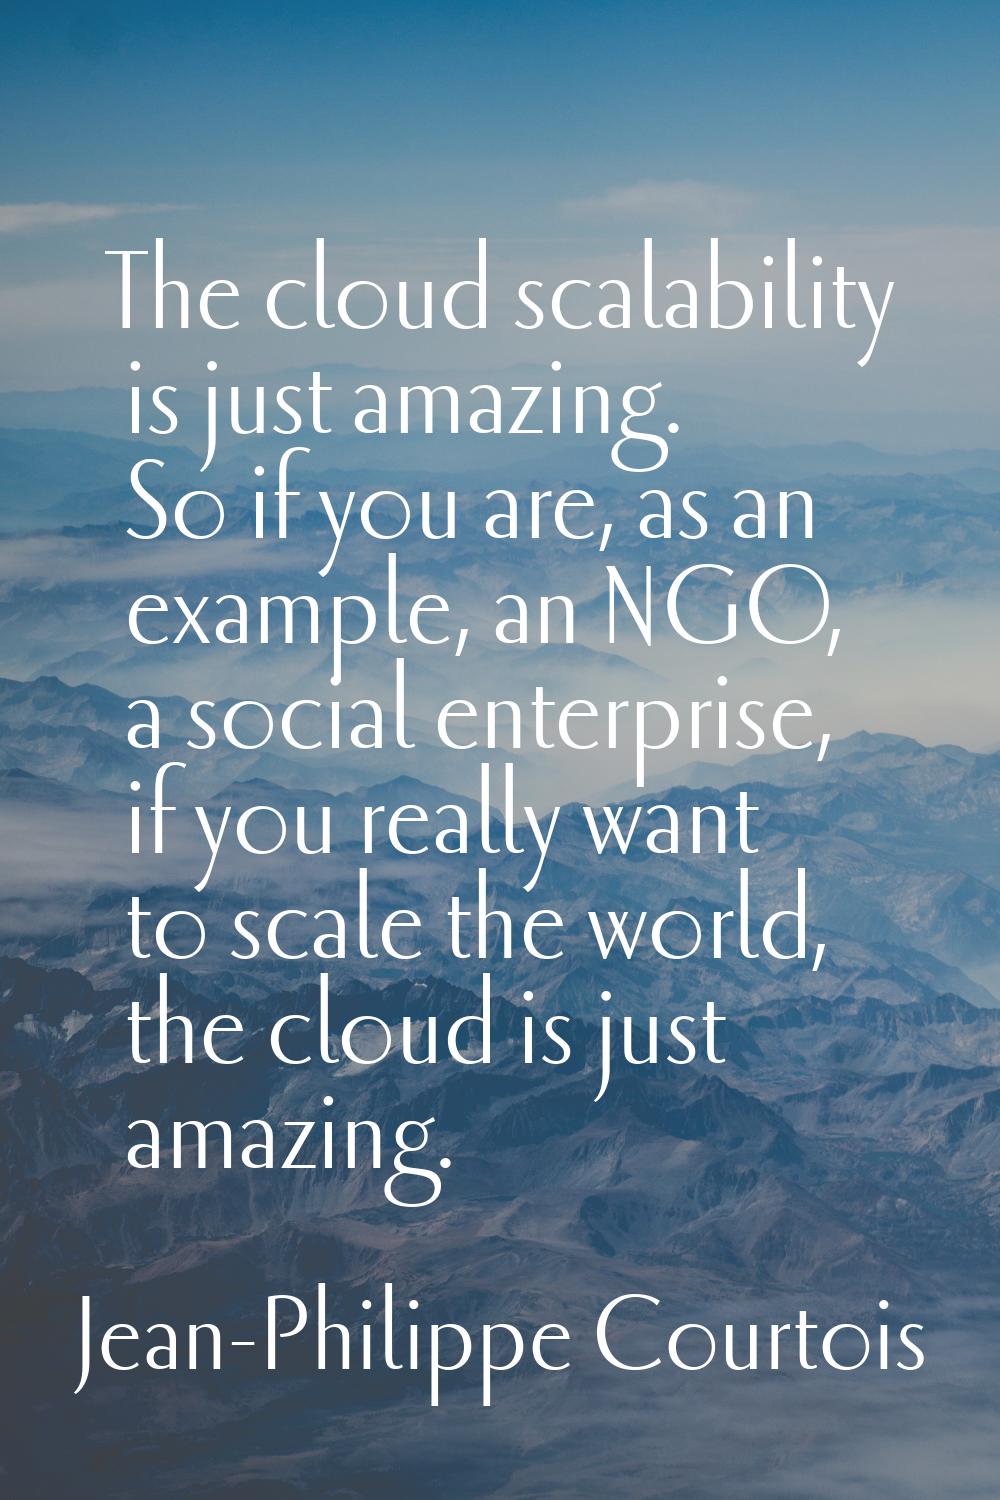 The cloud scalability is just amazing. So if you are, as an example, an NGO, a social enterprise, i